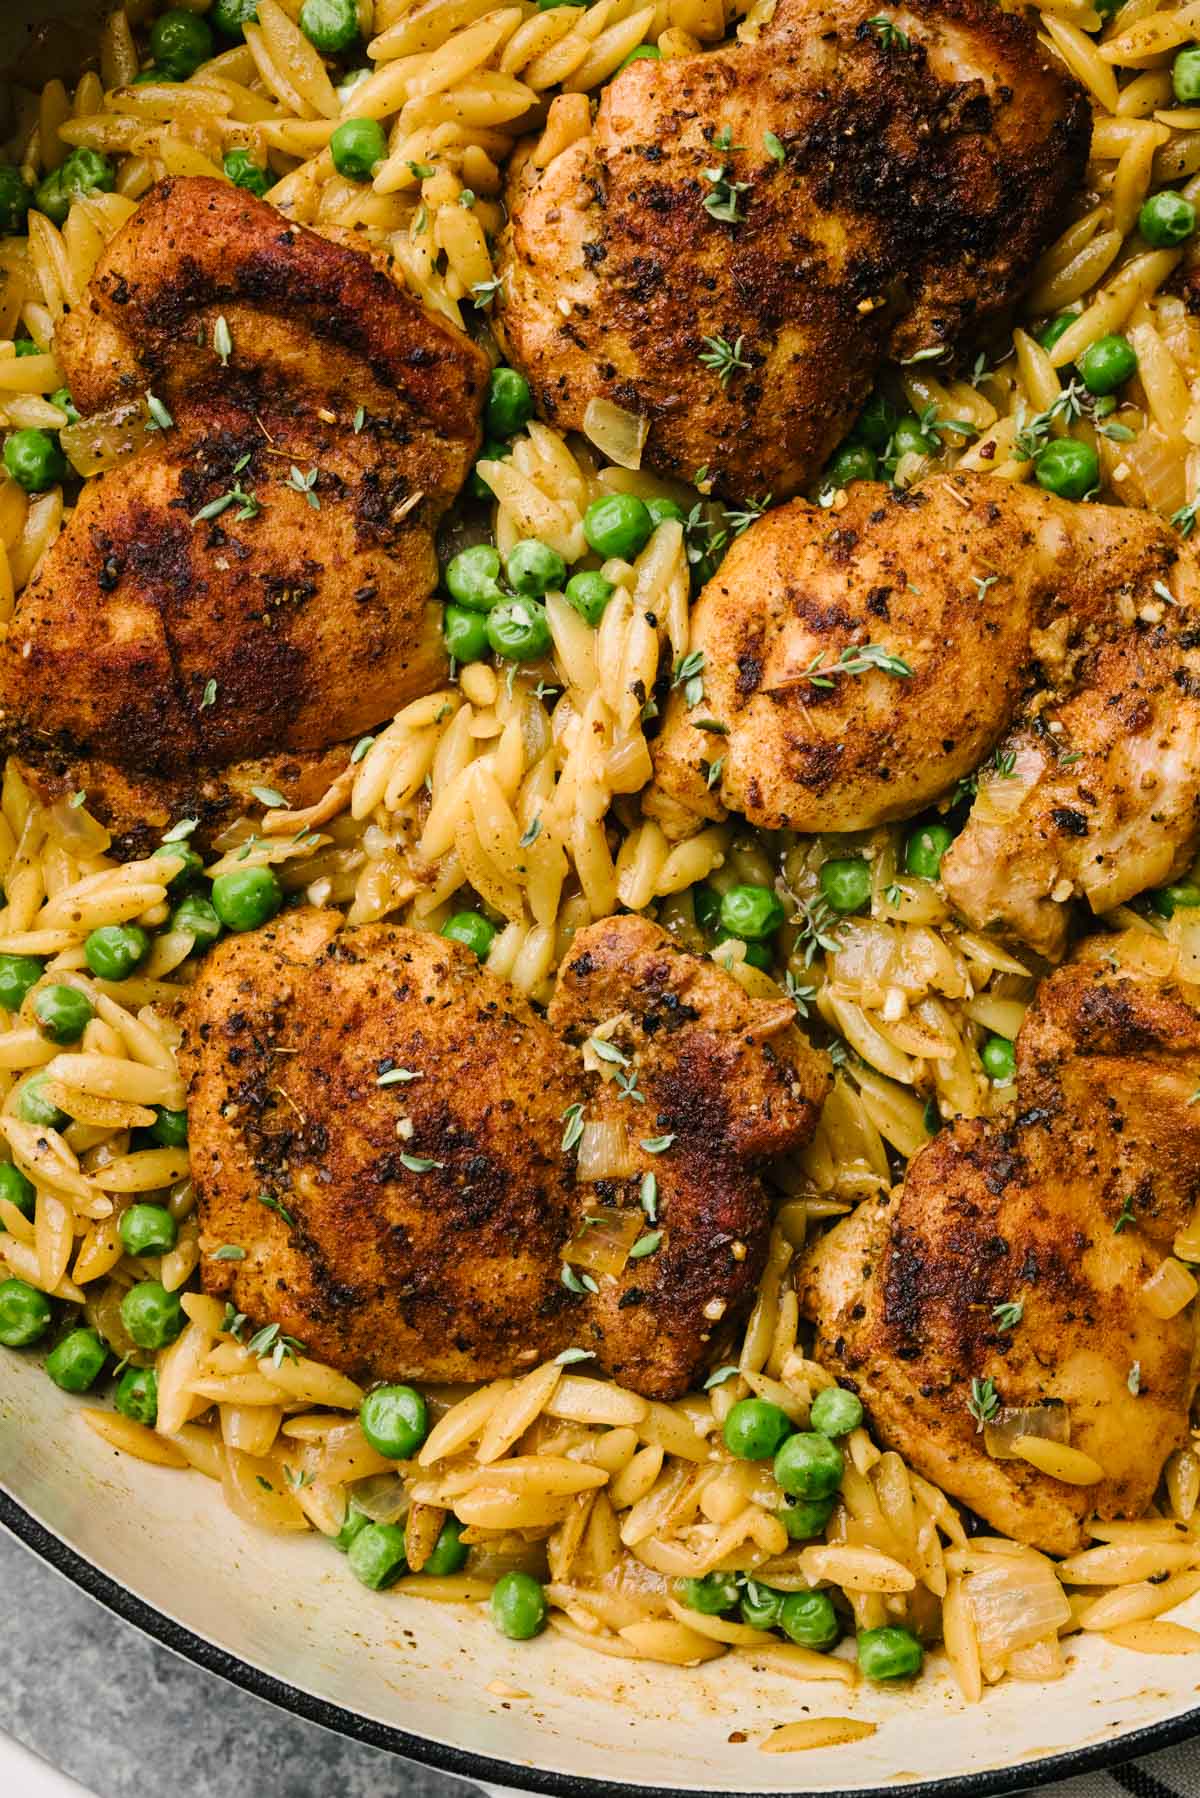 Seared chicken thighs nestled into a skillet of cooked orzo pasta with peas, parmesan cheese, and fresh thyme.